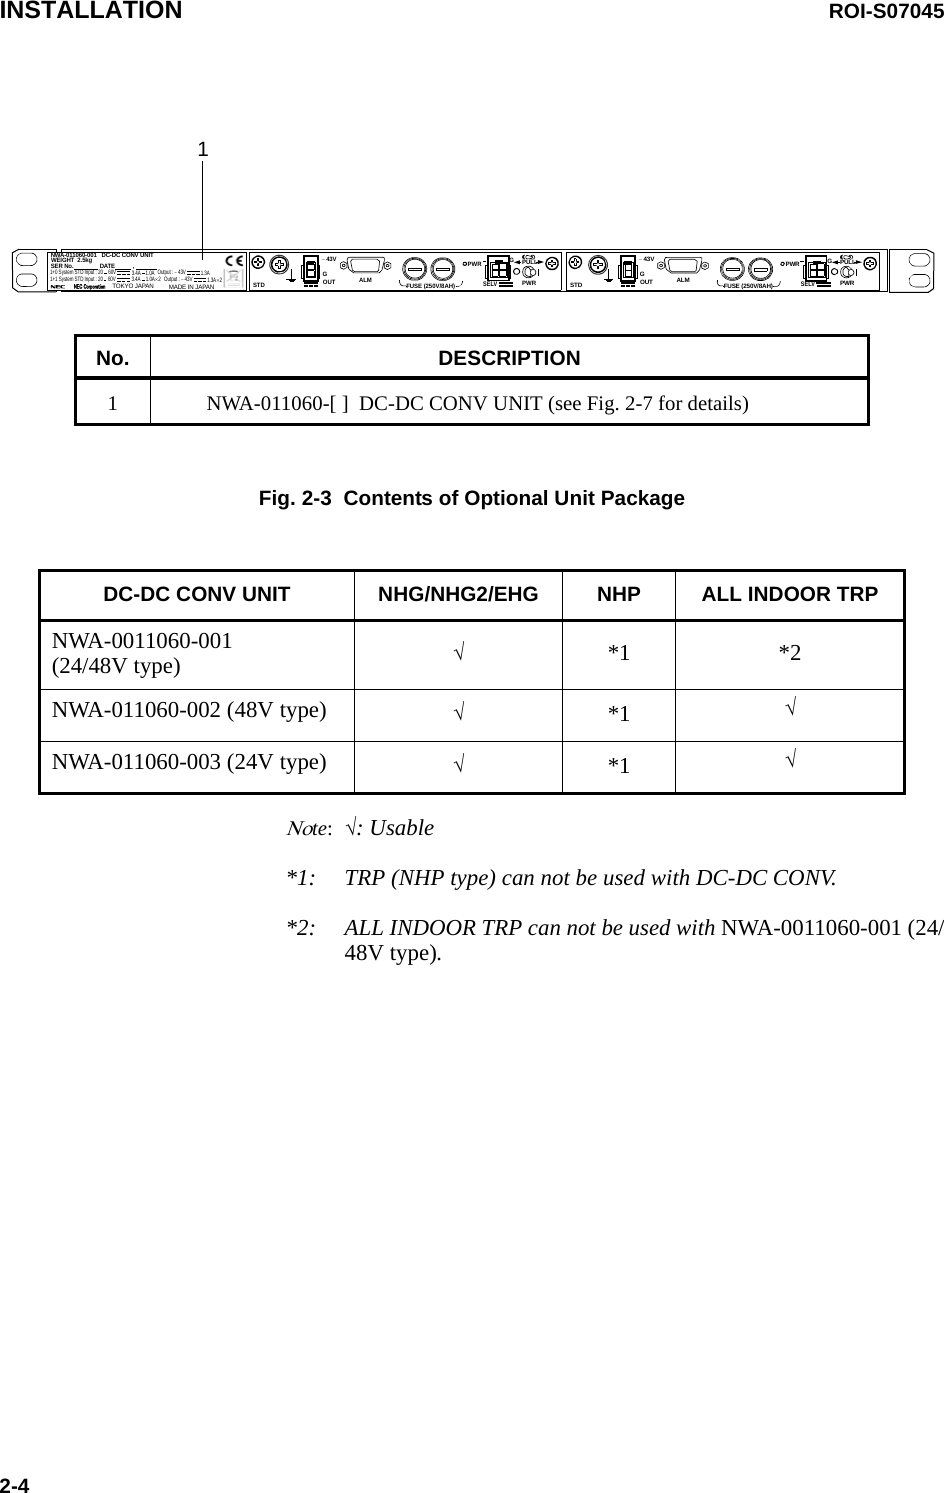 INSTALLATION ROI-S070452-4Fig. 2-3  Contents of Optional Unit PackageΝοte:√: Usable*1:  TRP (NHP type) can not be used with DC-DC CONV.*2:  ALL INDOOR TRP can not be used with NWA-0011060-001 (24/48V type).SELVPWR PULLPWRALM FUSE (250V/8AH)− 43VGOUTSTDGSELVPWR PULLPWRALM FUSE (250V/8AH)− 43VGOUTSTDGNWA-011060-001   DC-DC CONV UNITSER No.                DATE           ,              WEIGHT  2.5kgMADE IN JAPANNEC Corporat ion      TOKYO JAPAN1+0 System STD Input : 20    60V    3.4A    1.0A   Output : − 43V    1.3A   1+1 System STD Input : 20    60V    1.3A×2  3.4A    1.0A×2   Output : − 43V   1No. DESCRIPTION1 NWA-011060-[ ]  DC-DC CONV UNIT (see Fig. 2-7 for details)DC-DC CONV UNIT NHG/NHG2/EHG NHP ALL INDOOR TRPNWA-0011060-001 (24/48V type) √*1 *2NWA-011060-002 (48V type) √*1 √NWA-011060-003 (24V type) √*1 √